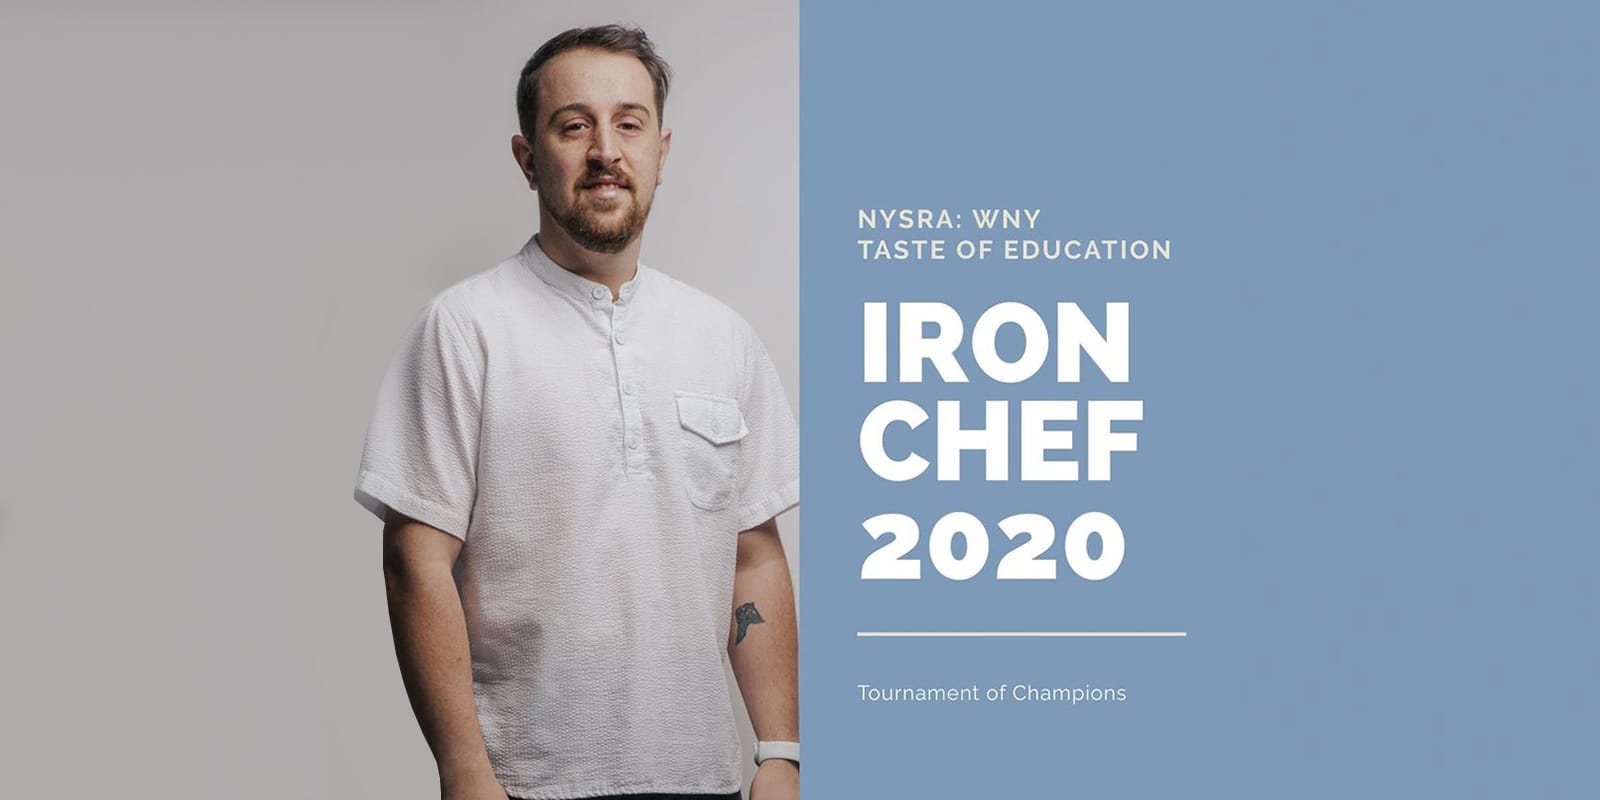 SUNY Niagara Alumnus to Compete in WNY’s Taste of Education Iron Chef Champions Competition